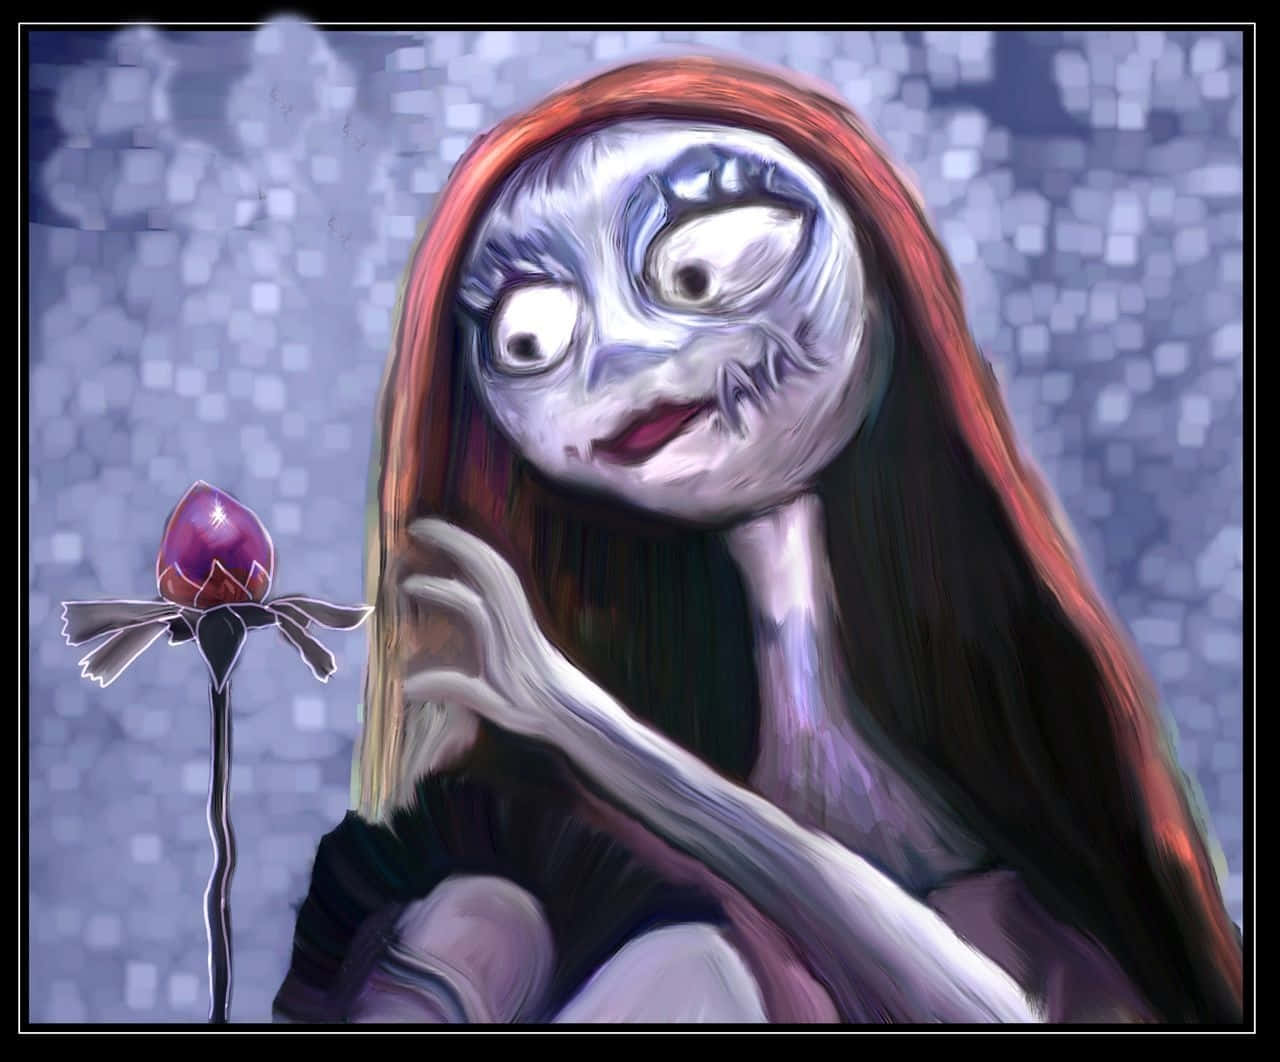 Cute and curious Sally from The Nightmare Before Christmas Wallpaper